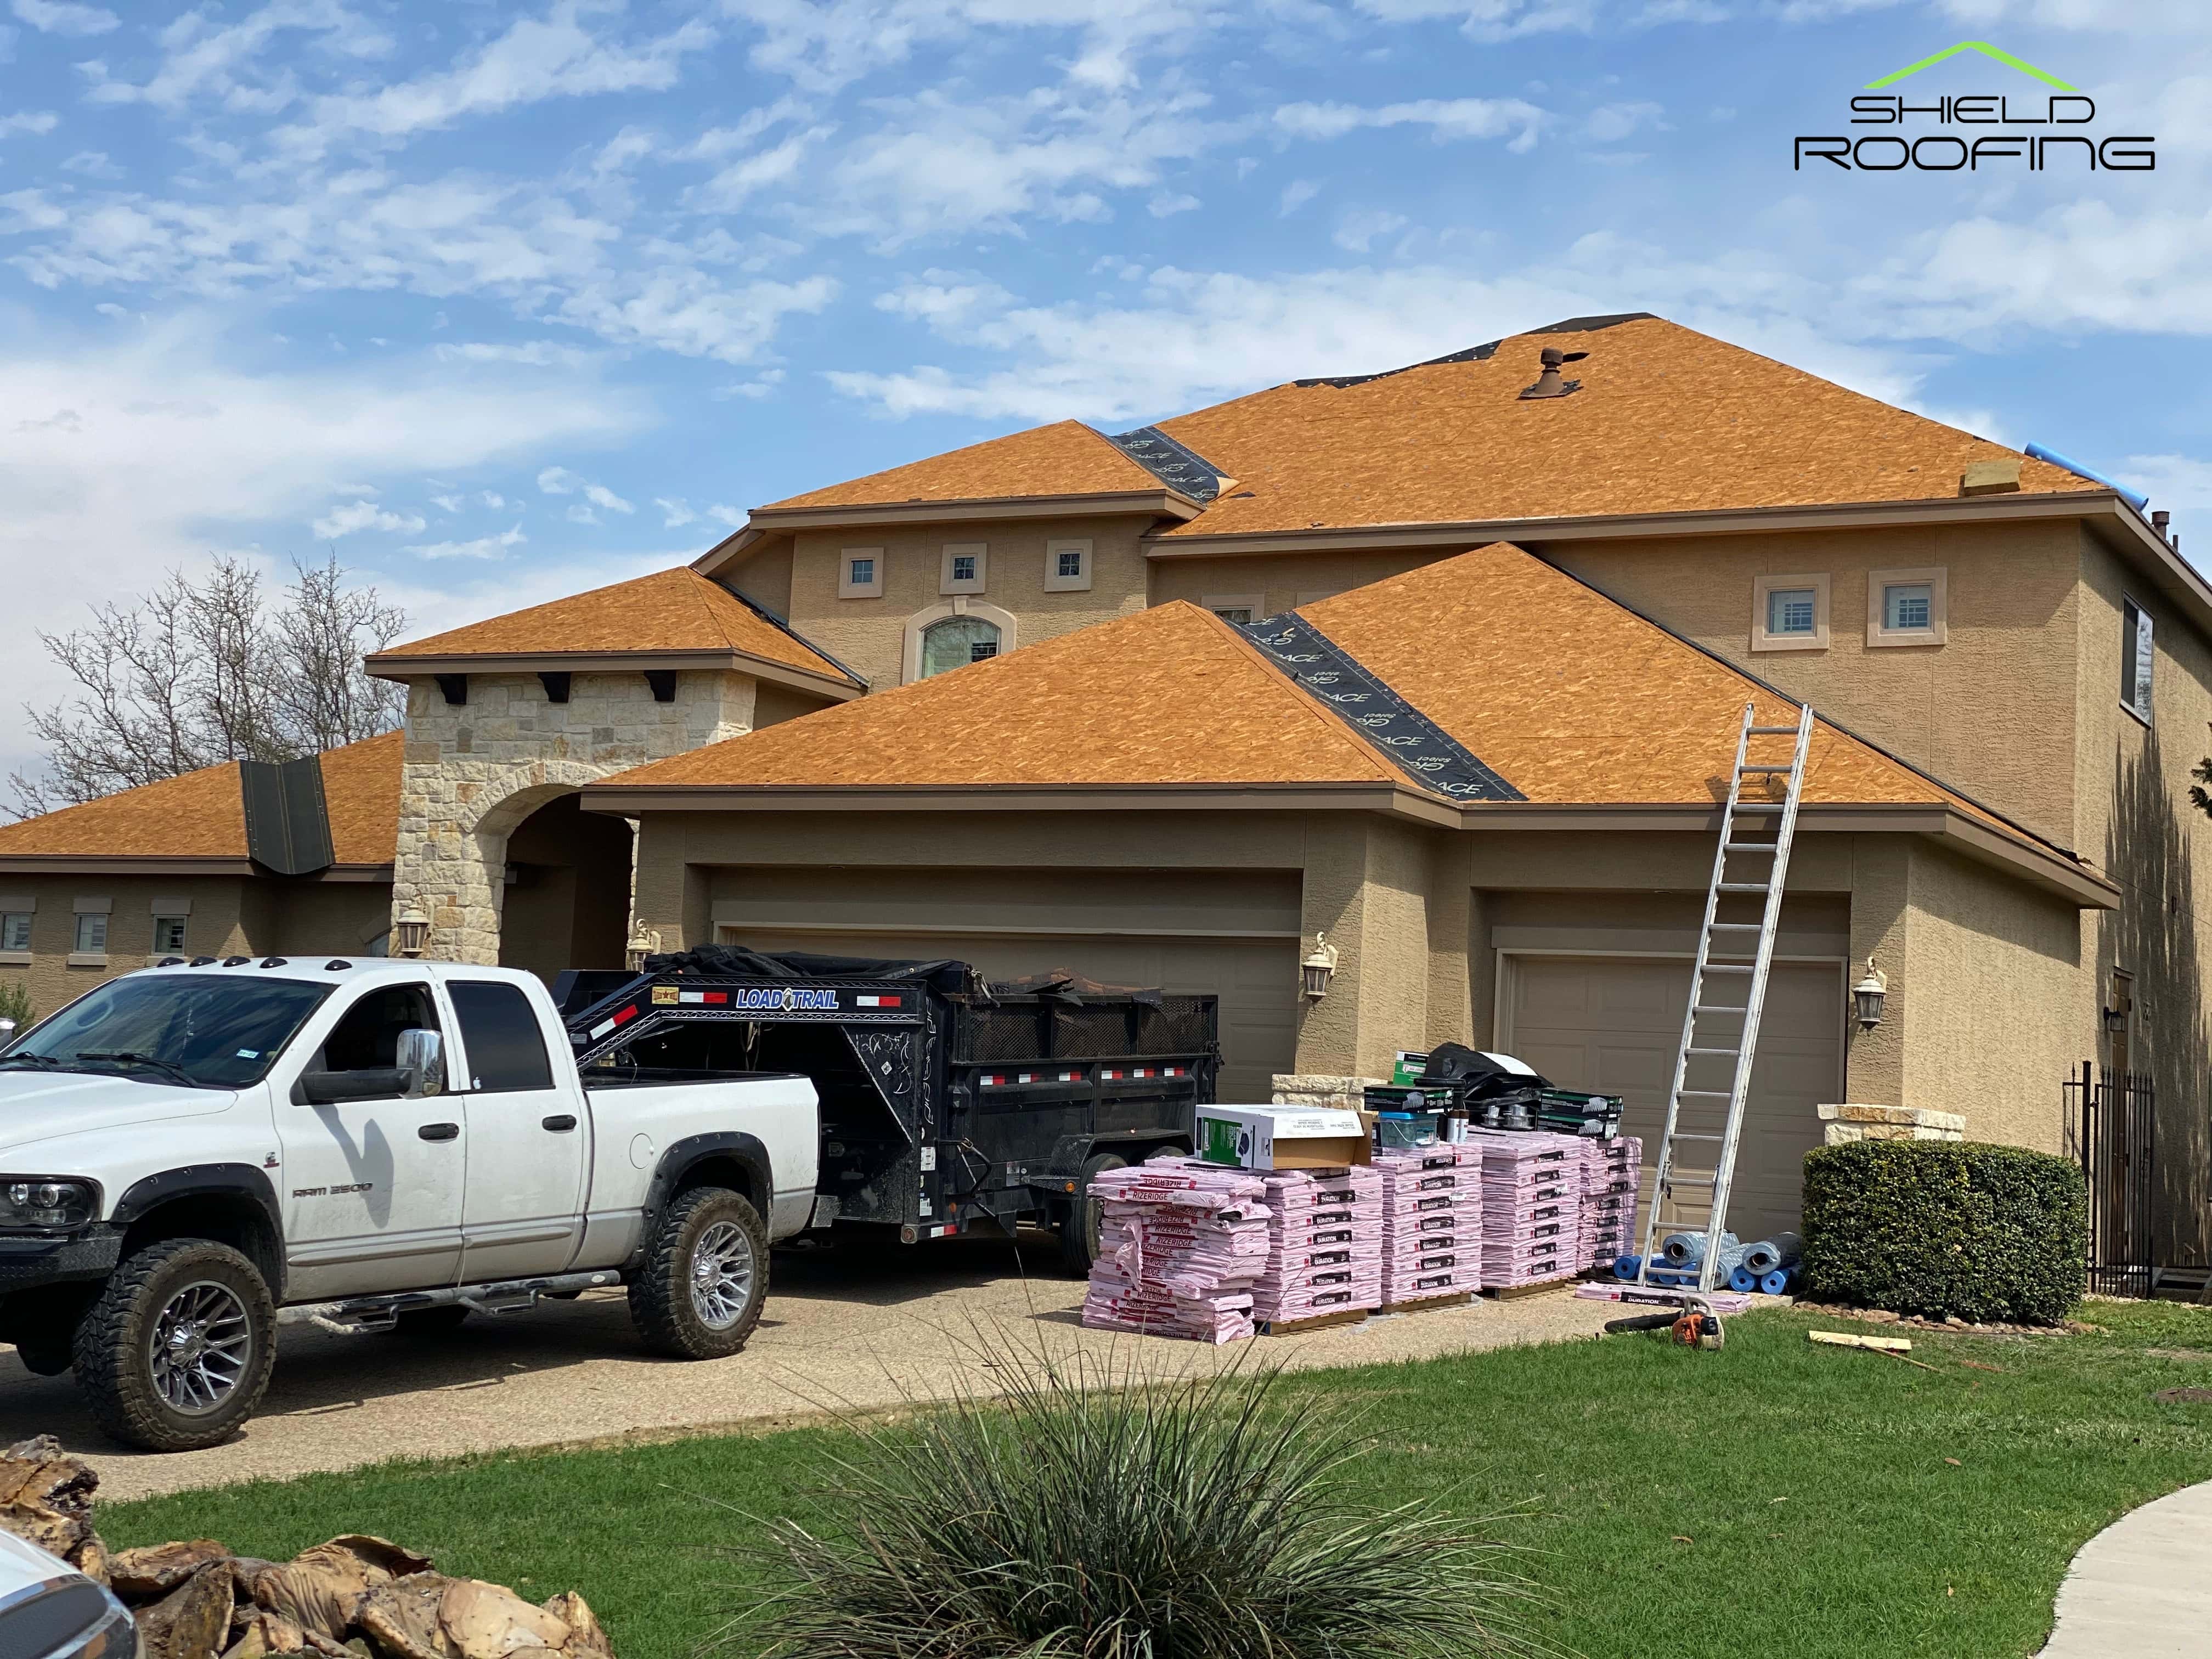 Shield Roofing - Boerne (TX 78006), US, roof tarping